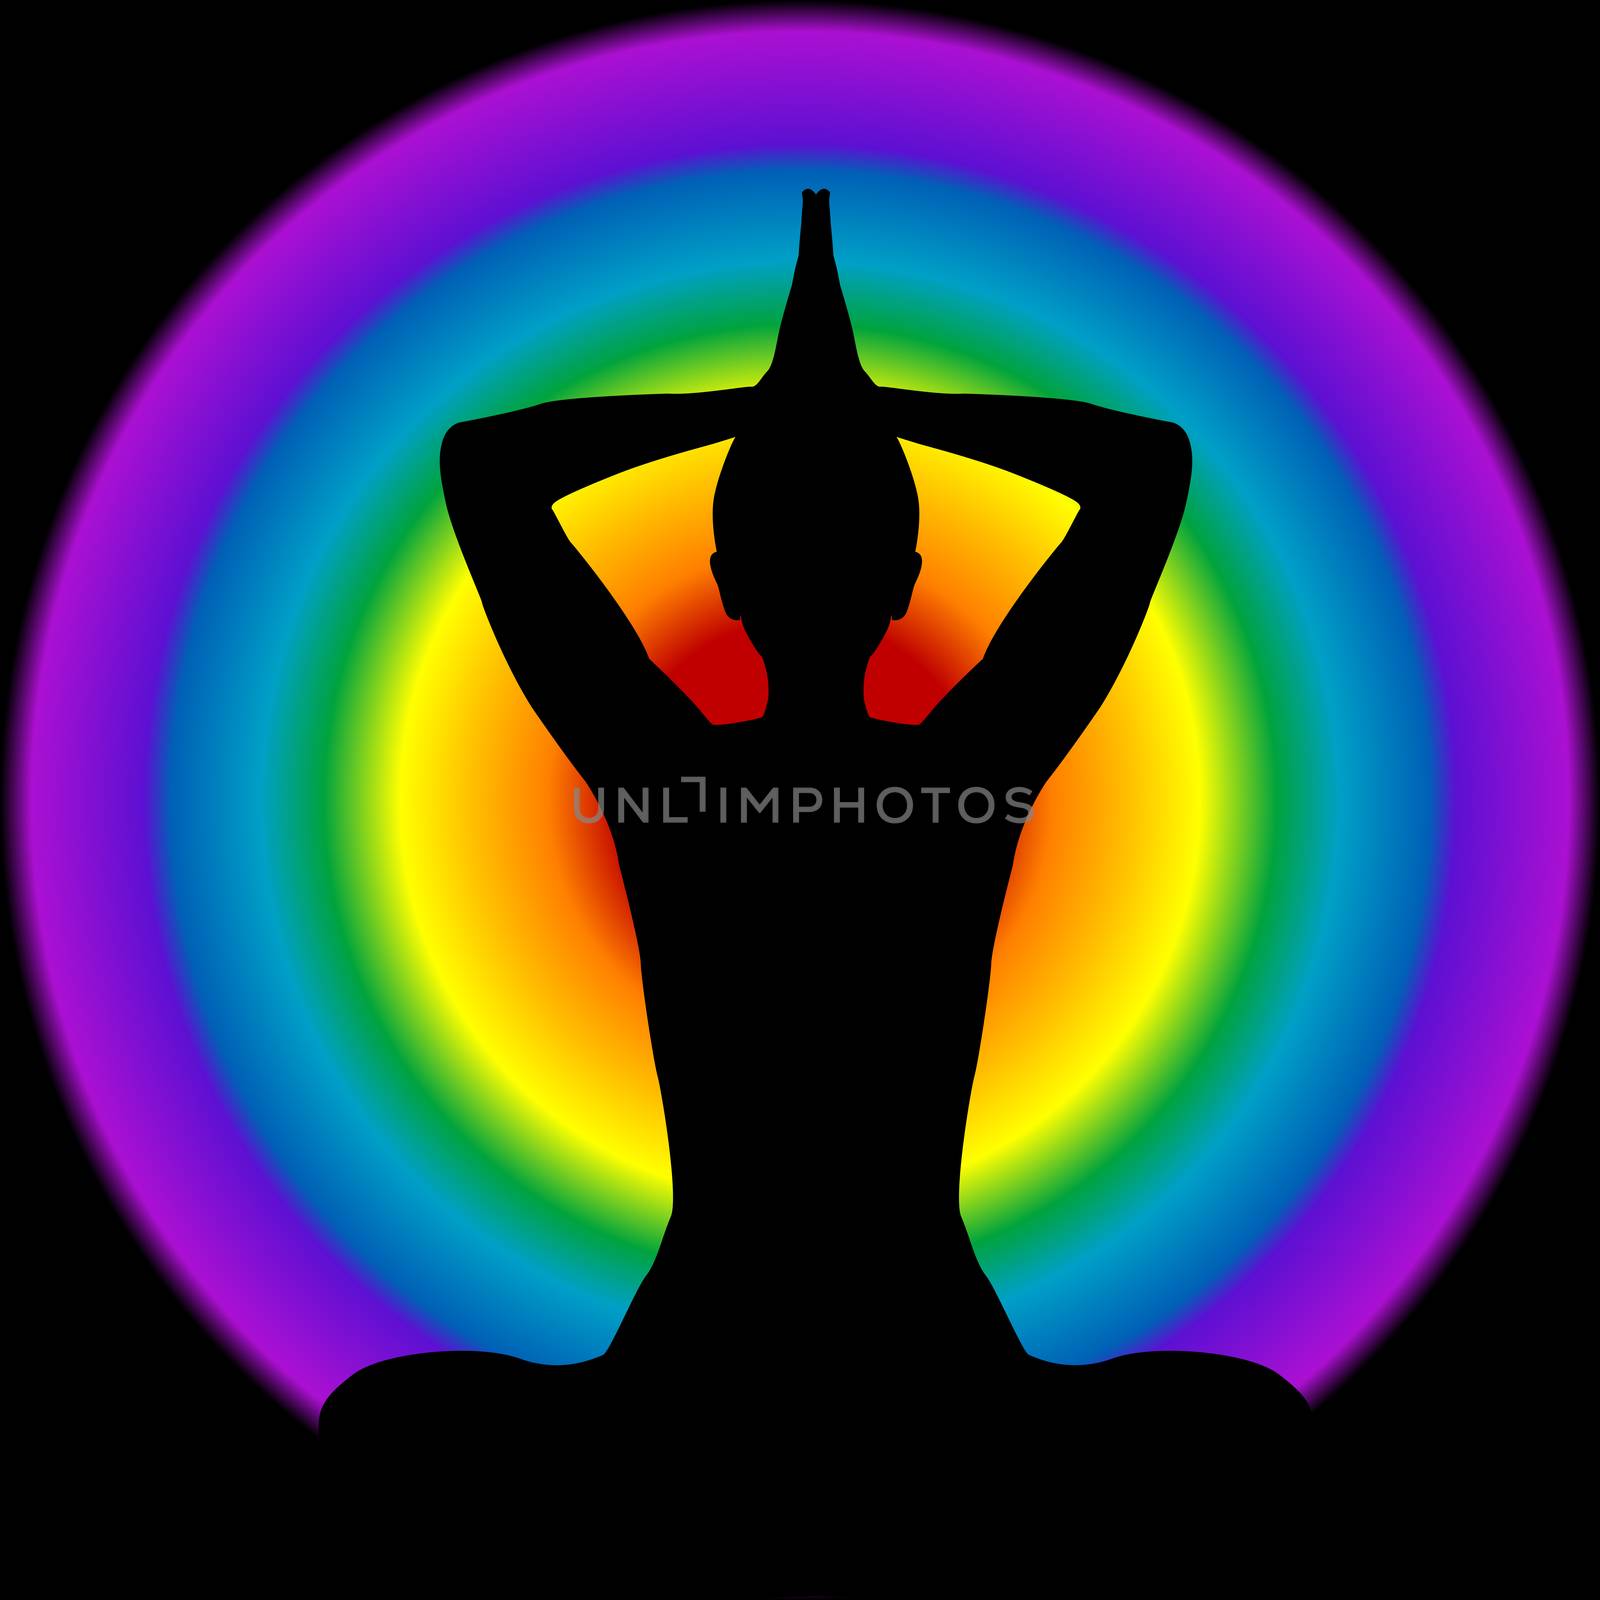 Human silhouette in yoga pose with aura and chakras colors on ba by hibrida13